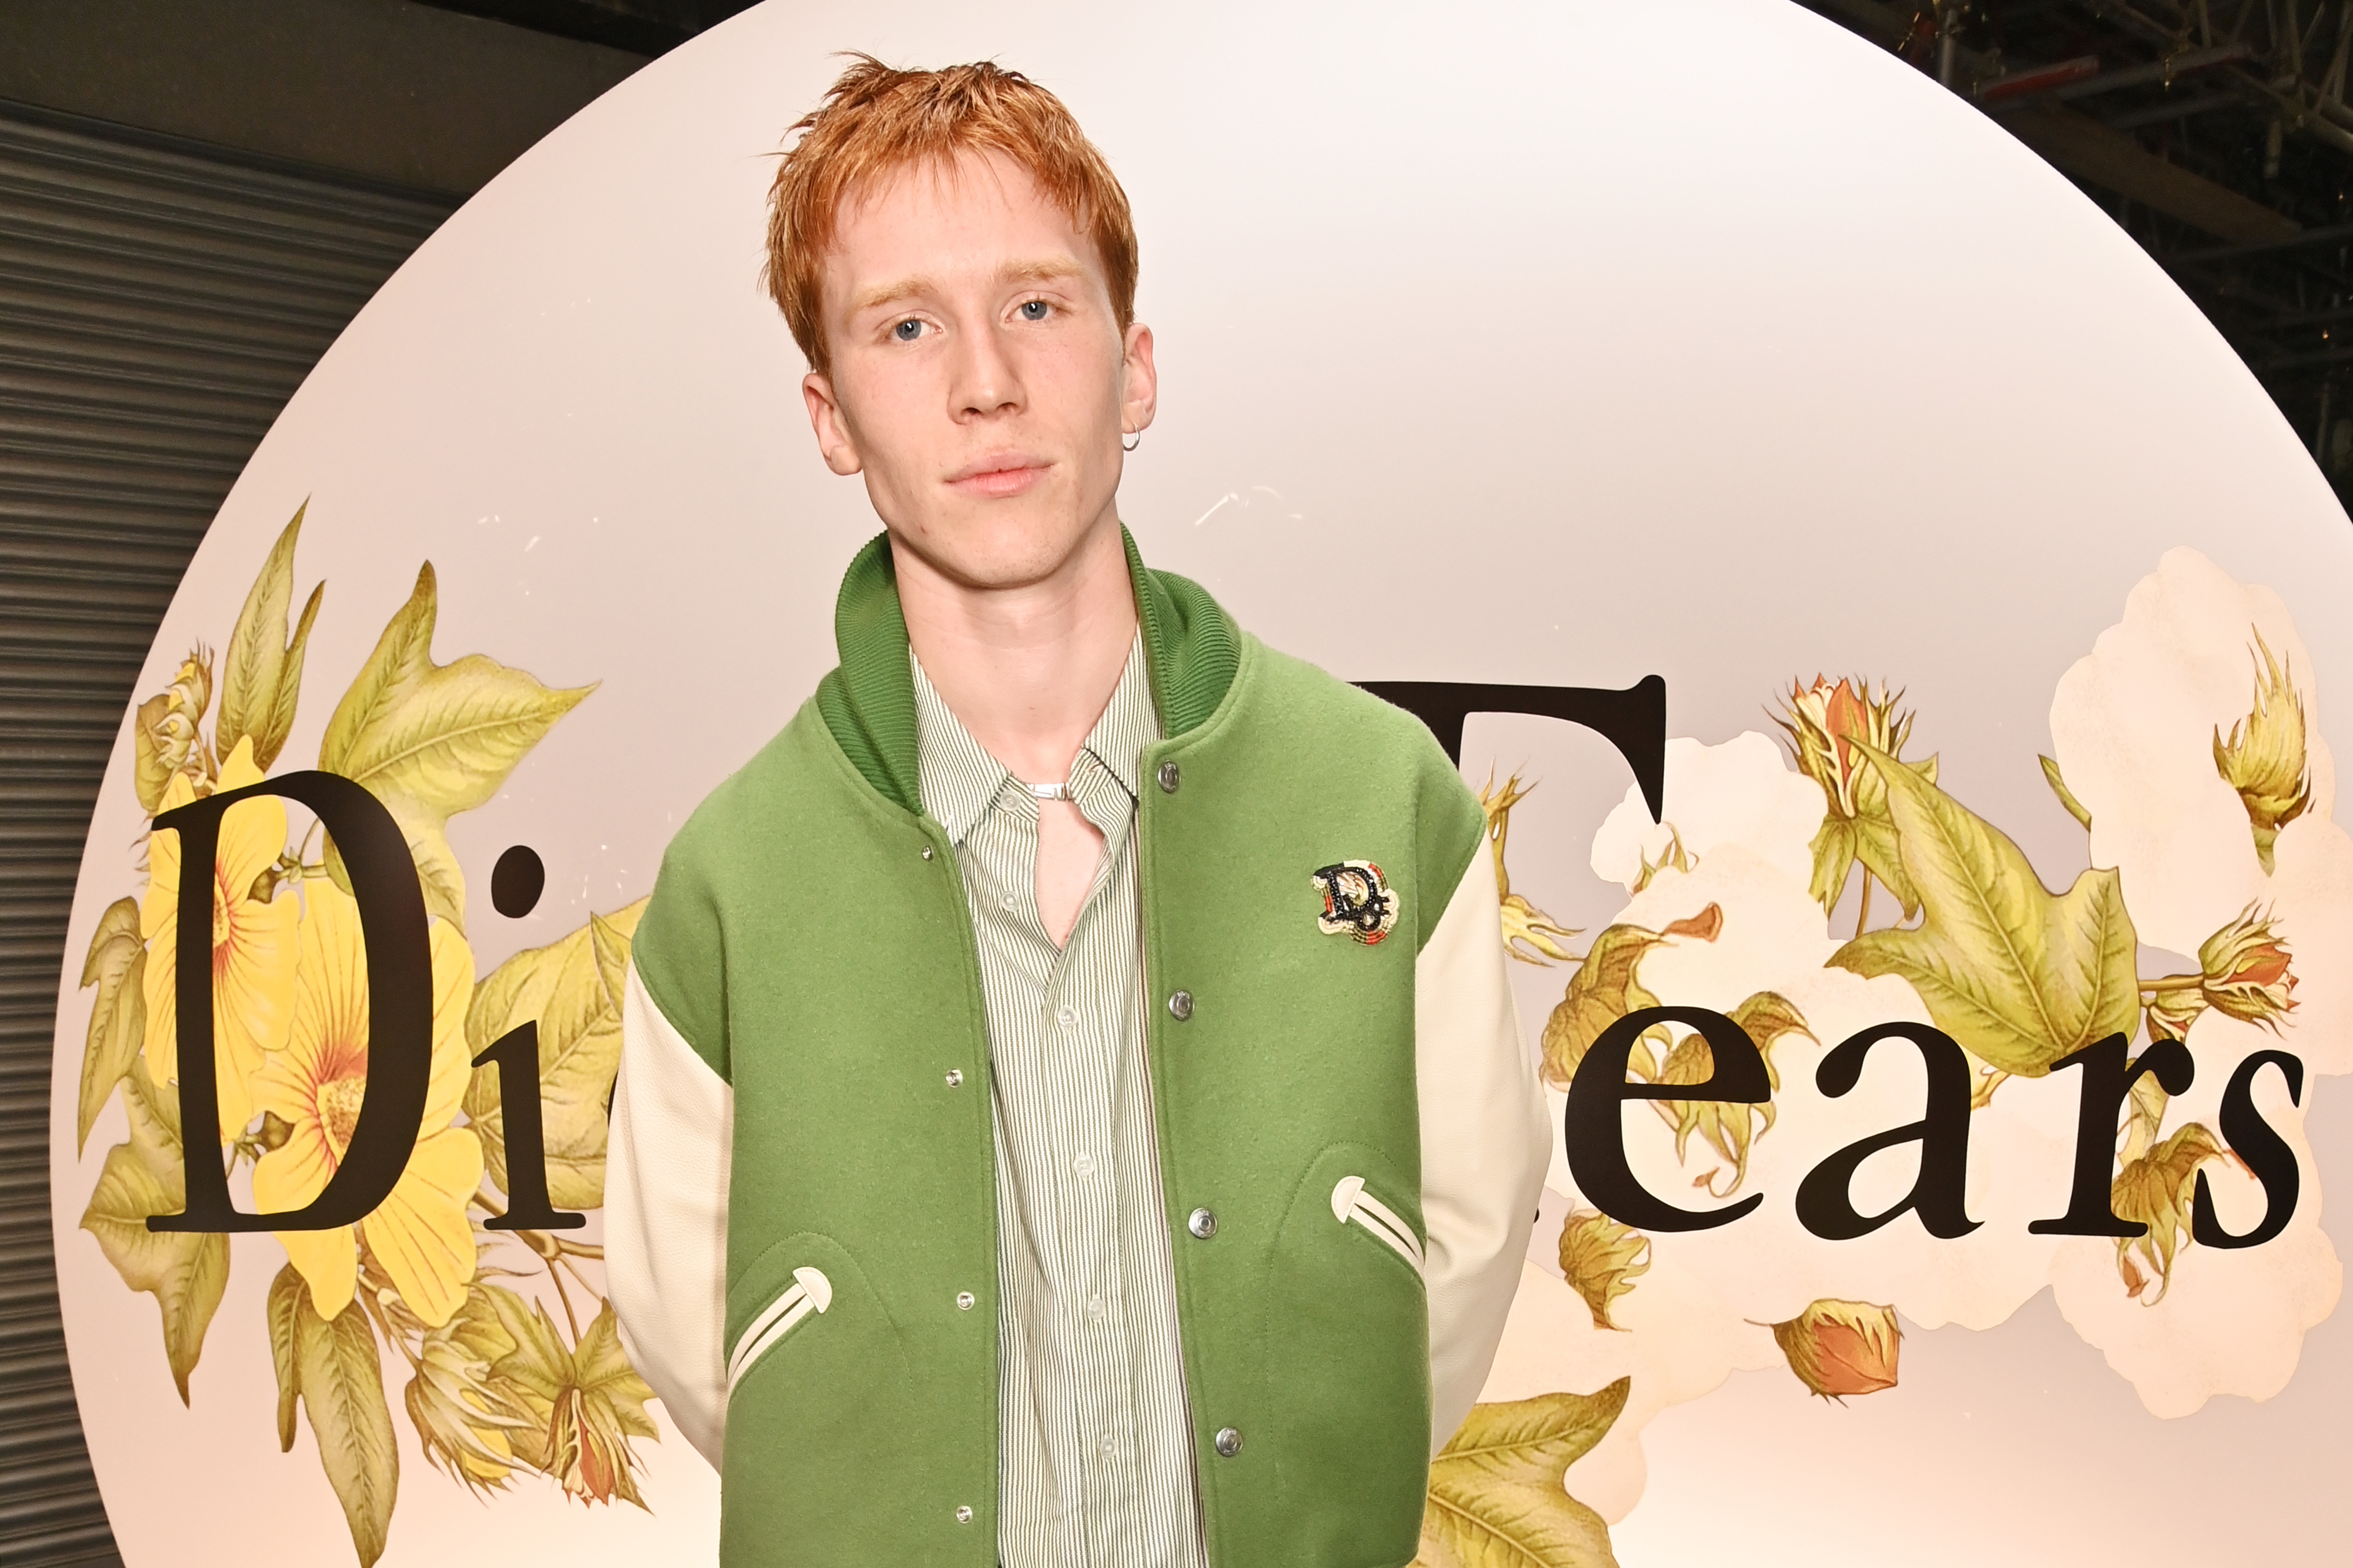 Luther Ford attends the Dior Tears pop-up launch party on July 8, 2023 in London, England